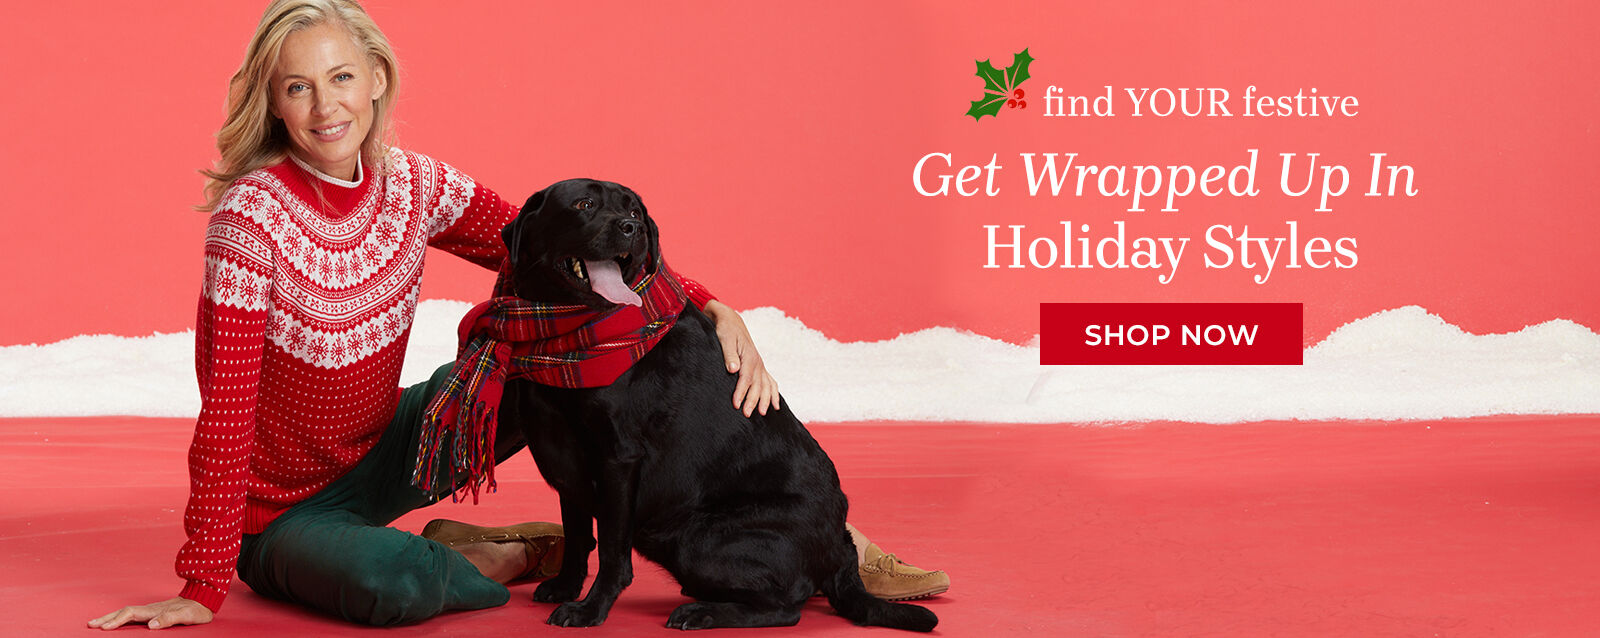 find your festive get wrapped up in holiday styles shop now